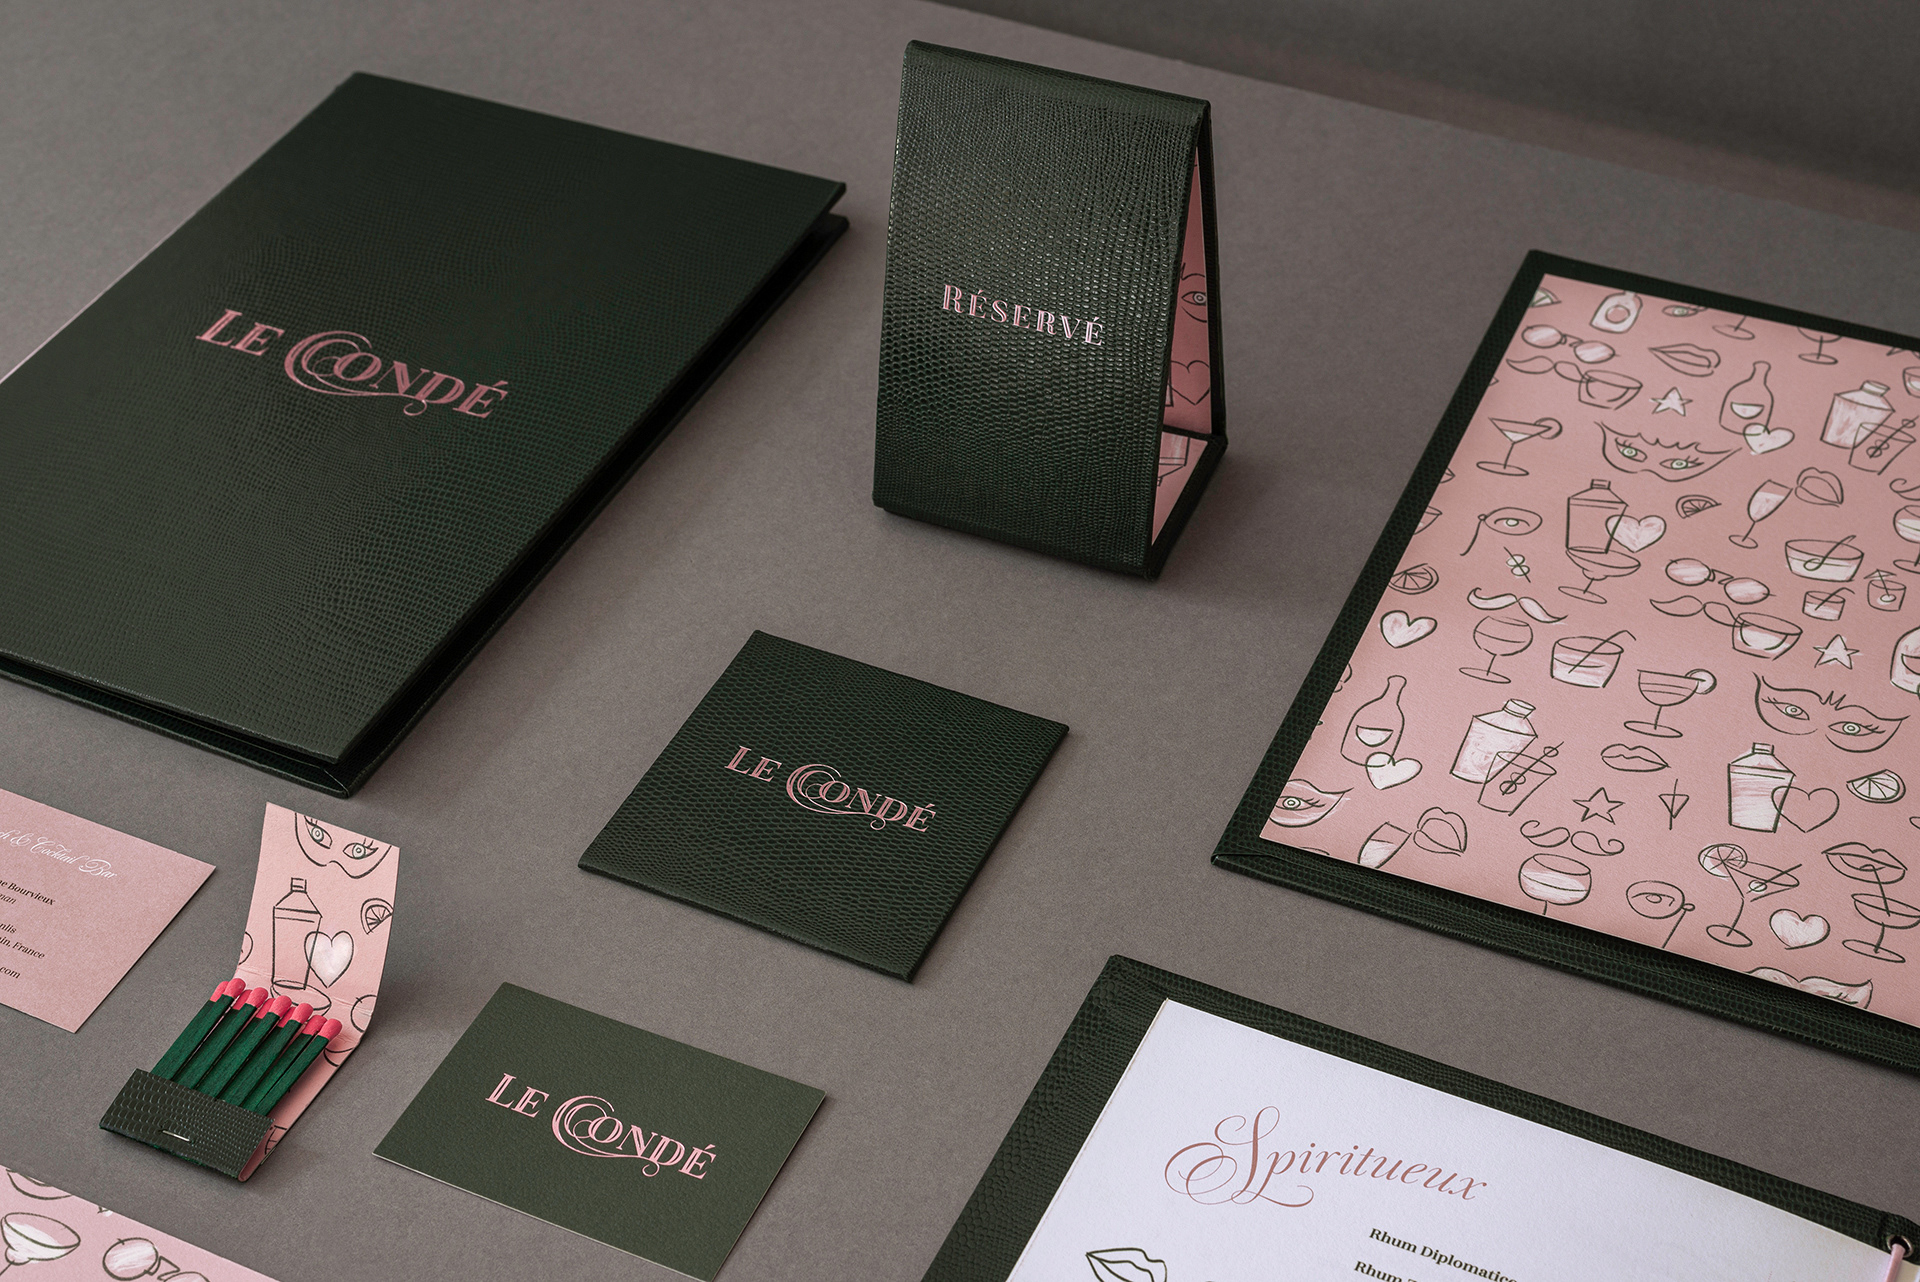 Le Cond, Punch & Cocktail Bar Branding